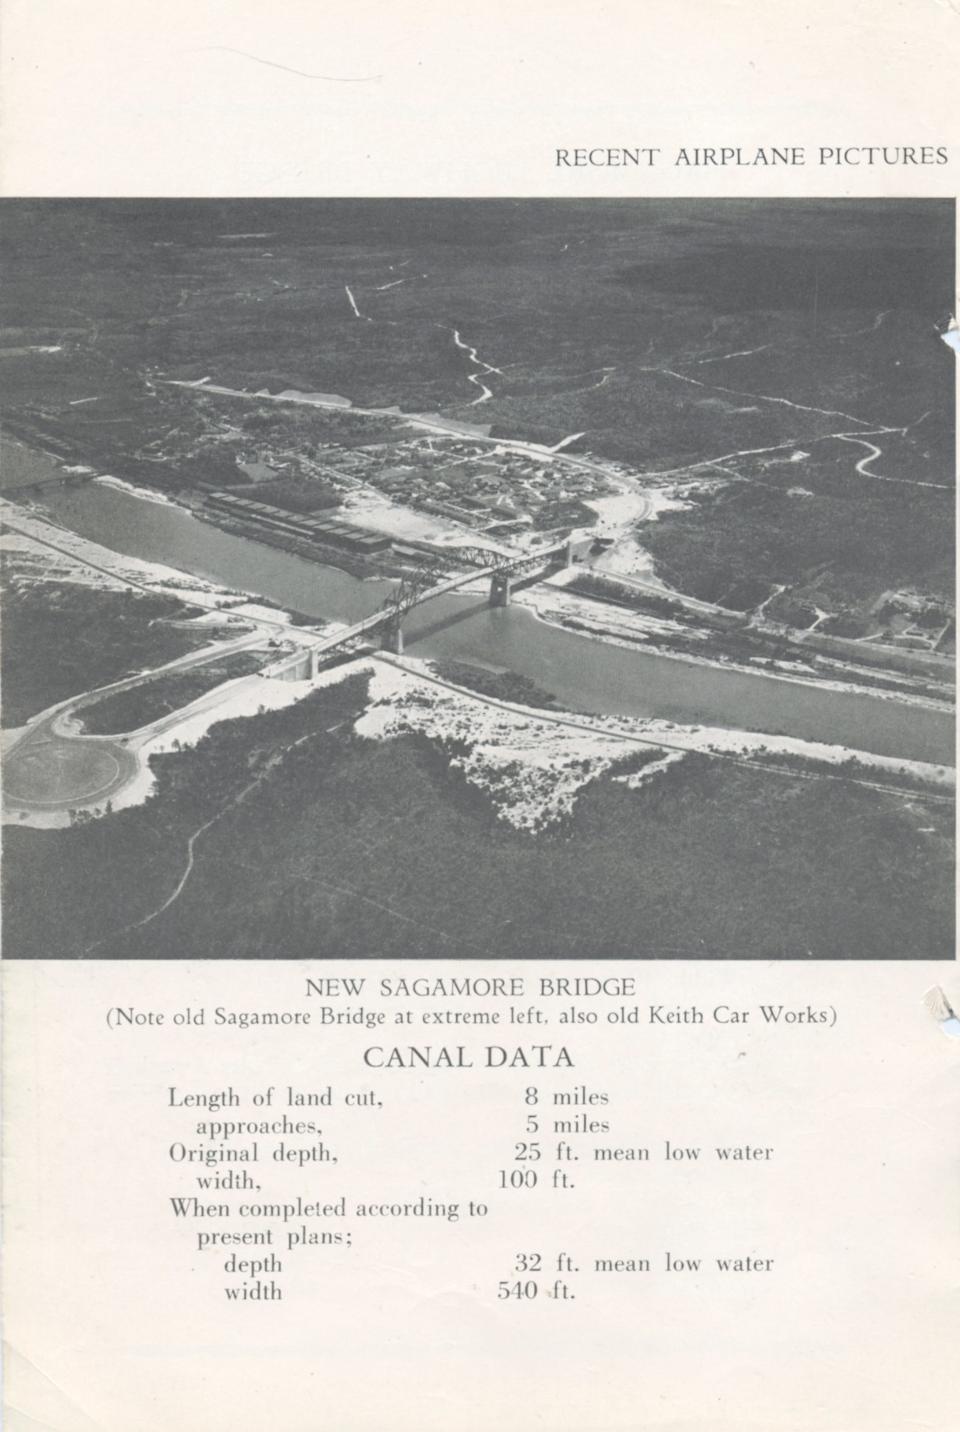 The new Sagamore Bridge is shown in the official program for the opening of the Cape Cod Canal bridges on June 22, 1935.